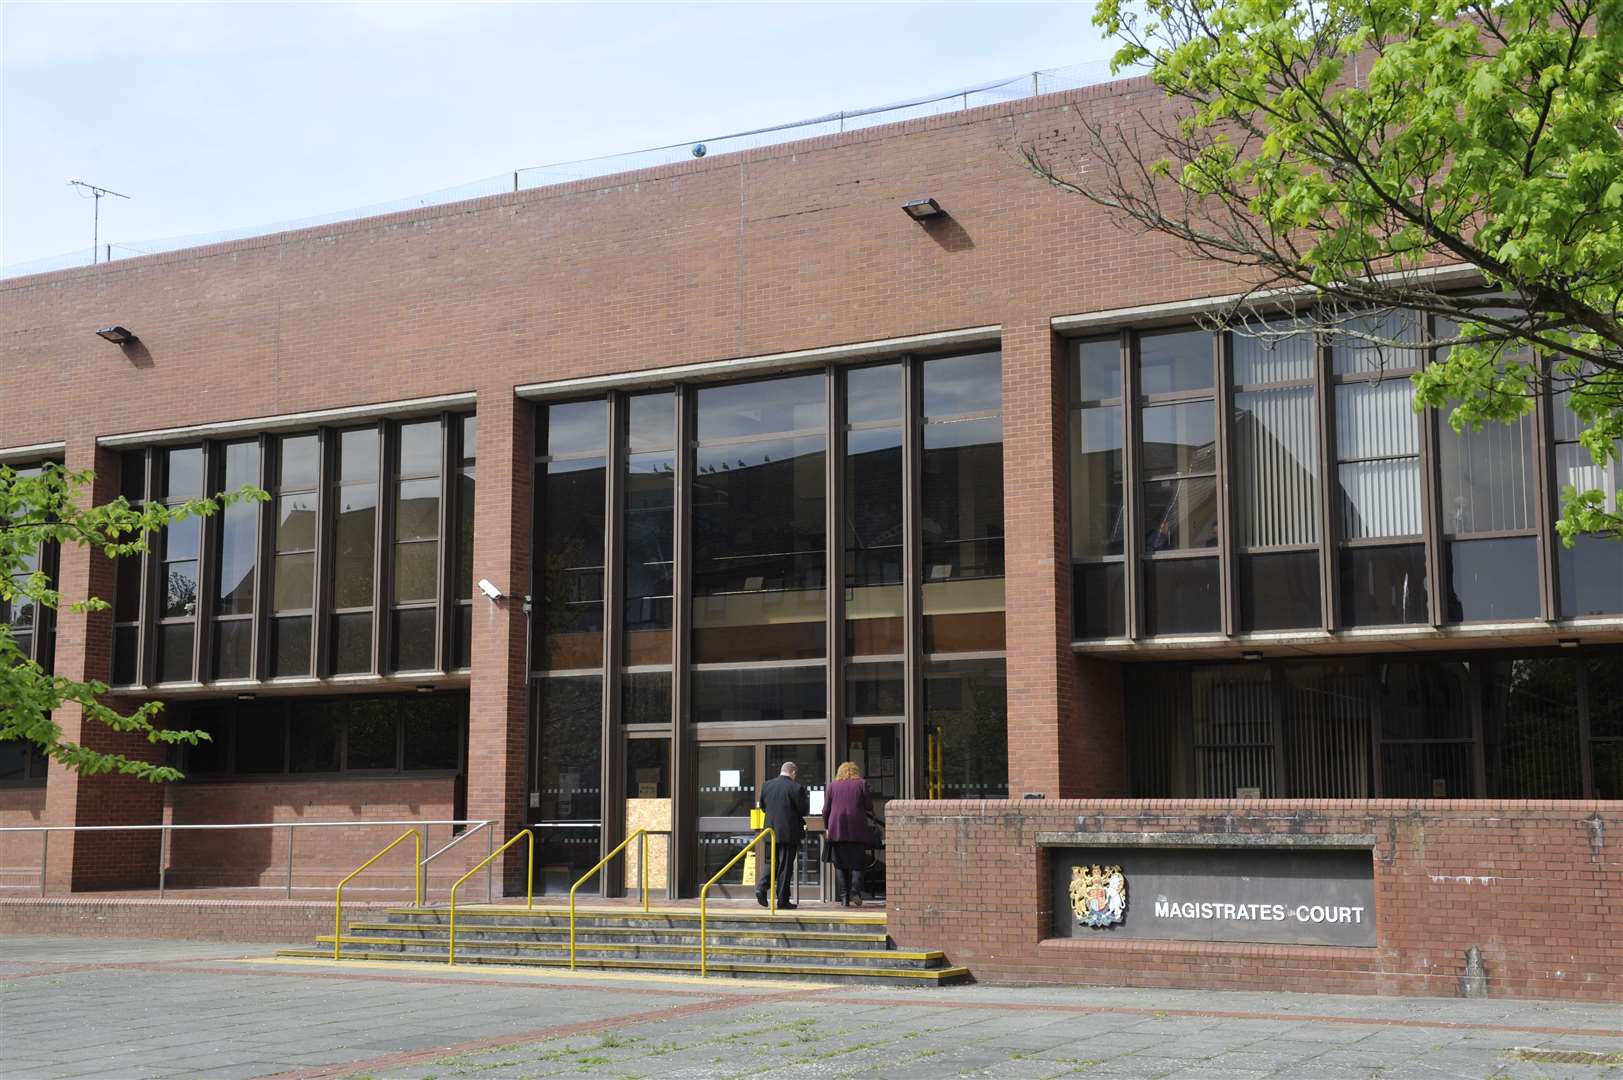 Ayling admitted drink-driving at Folkestone Magistrates Court, Folkestone